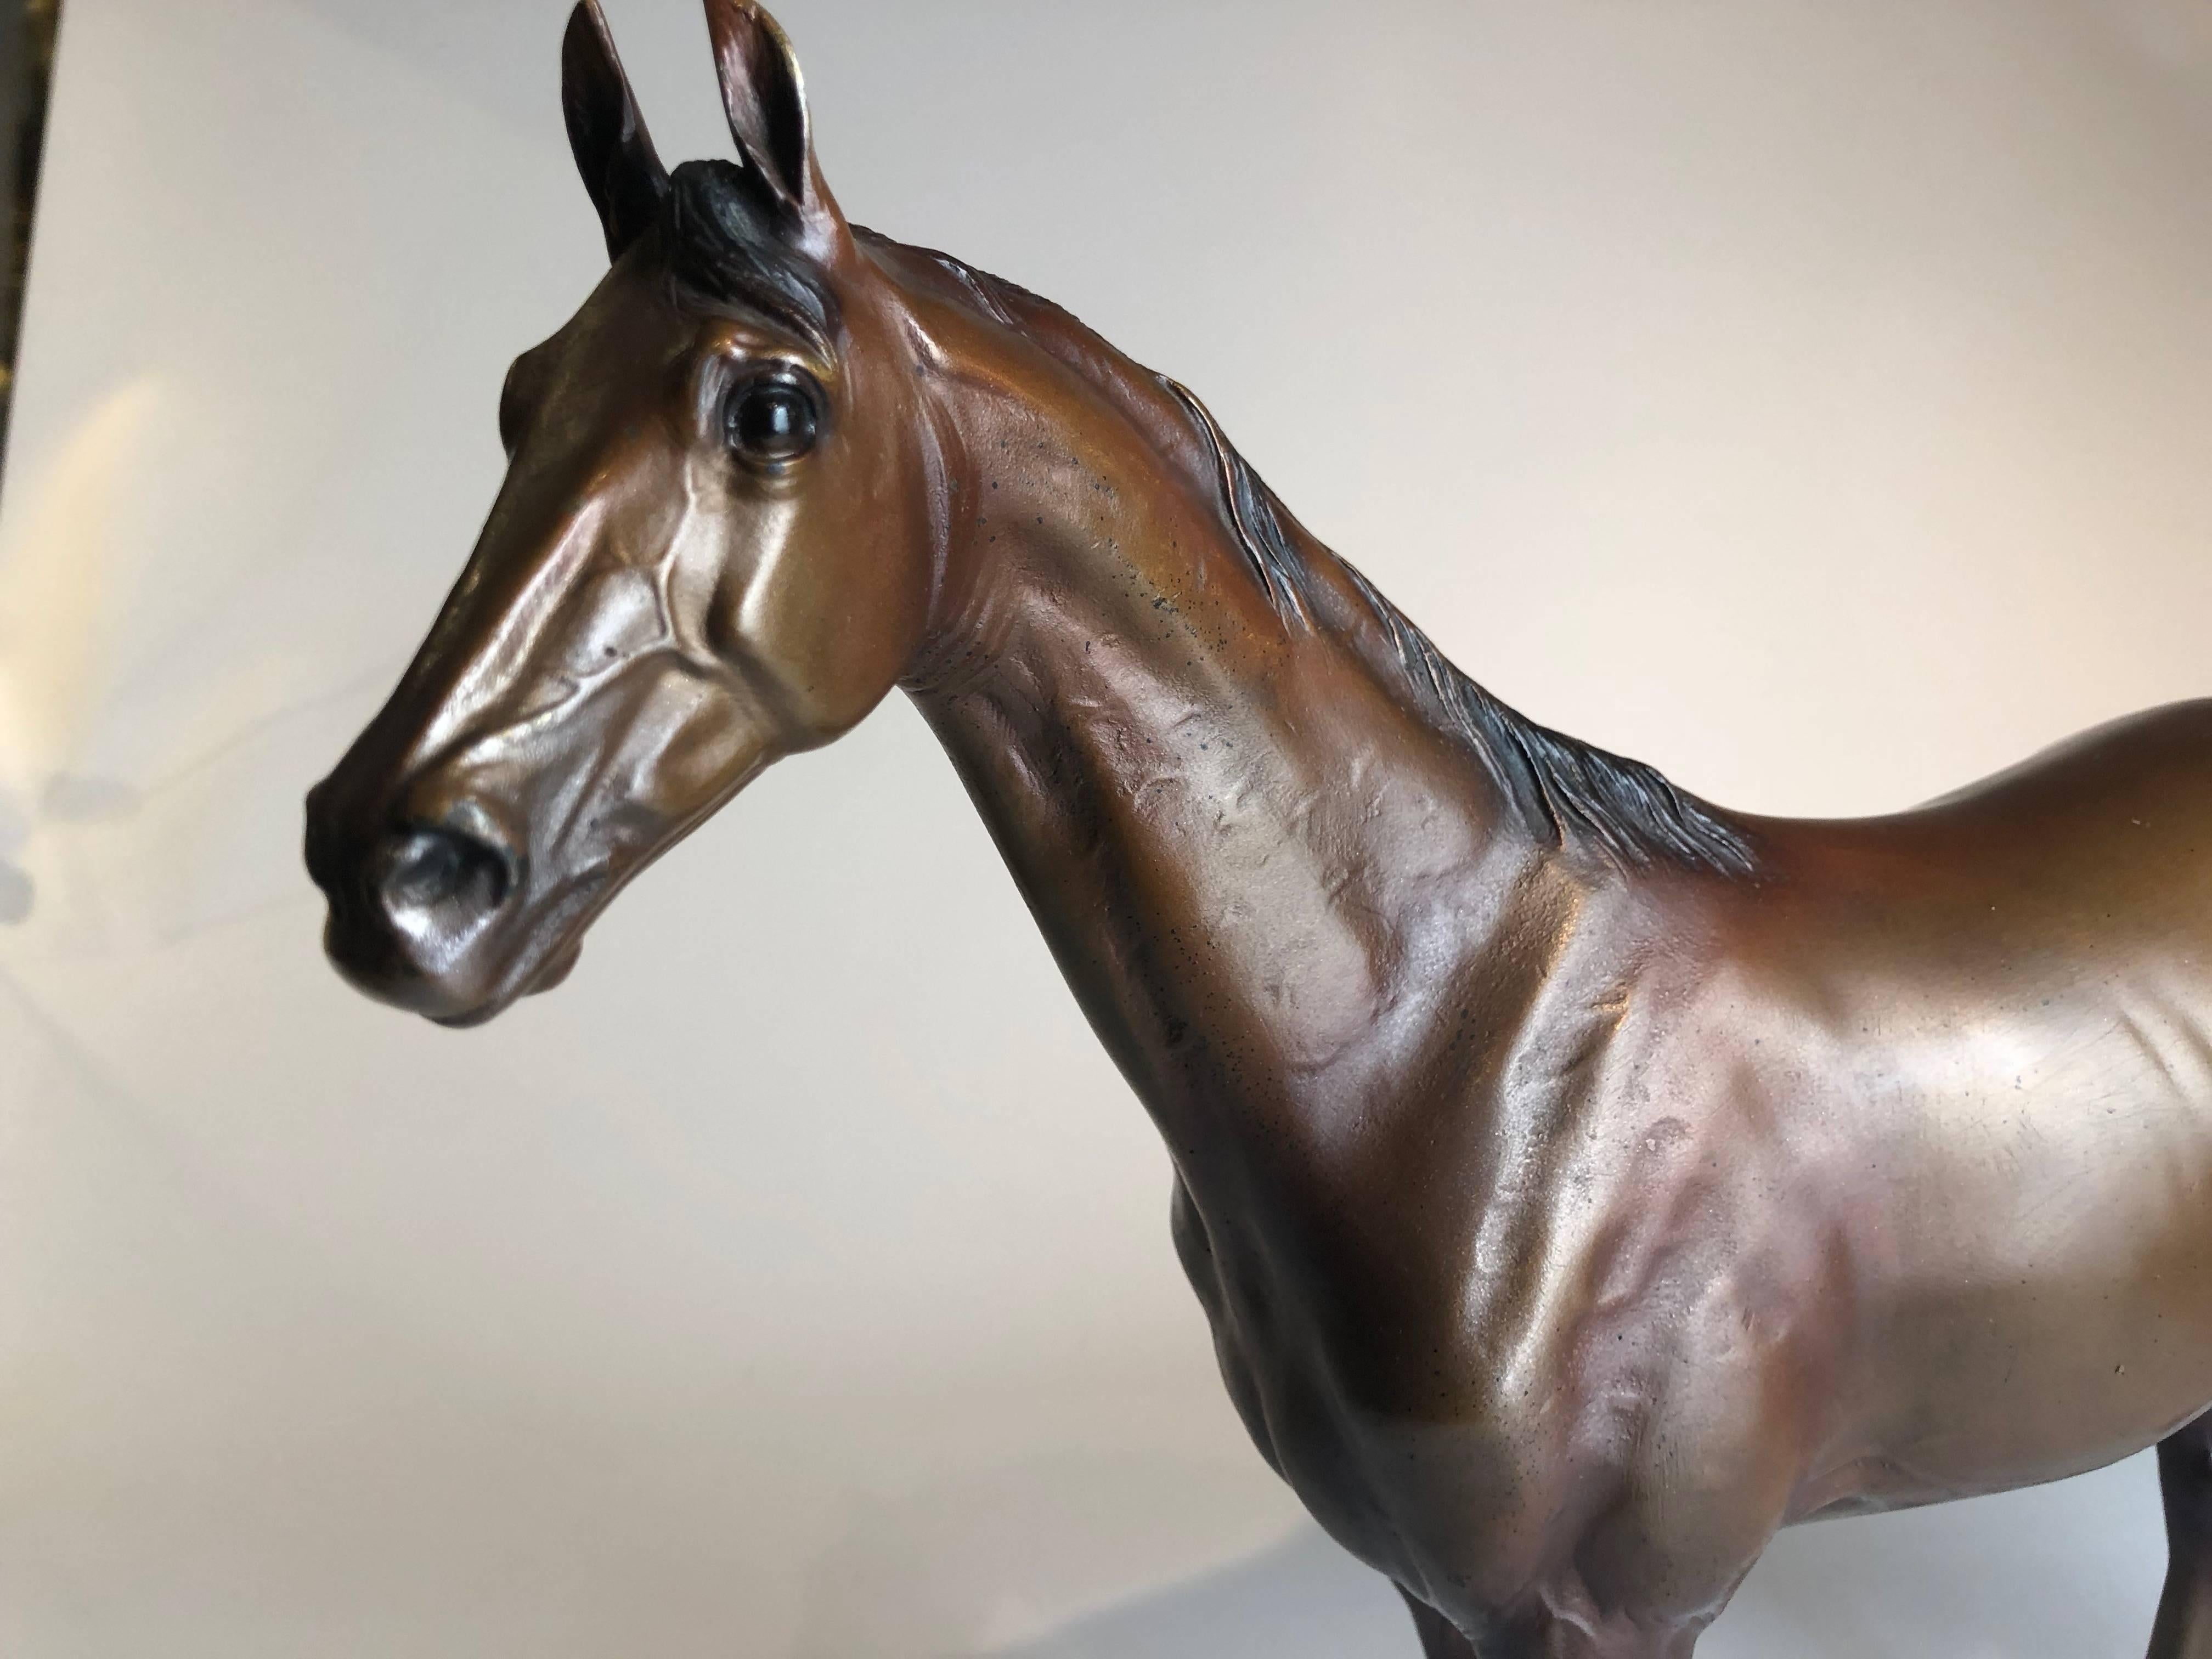 Wonderfully modelled bronze sculpture of horse by Franz Bergmann. This size model is rarely seen.

Measure: The horse stands 11